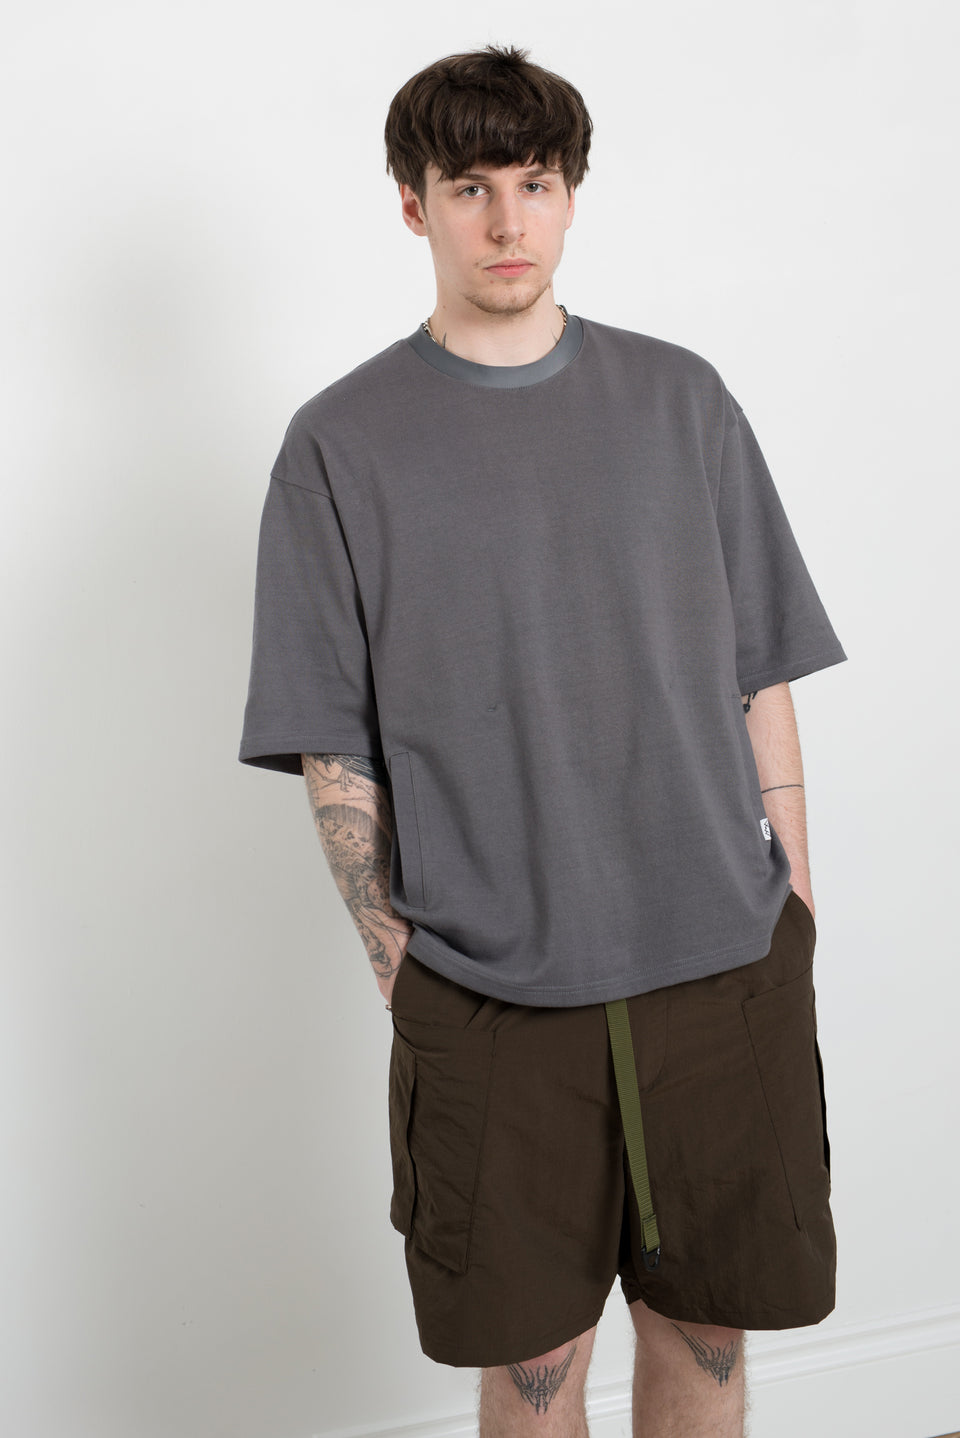 CMF Outdoor Garment 23SS SS23 Comfy Outdoor Garment Slow Dry Tee Half Sleeve Charcoal Calculus Victoria BC Canada